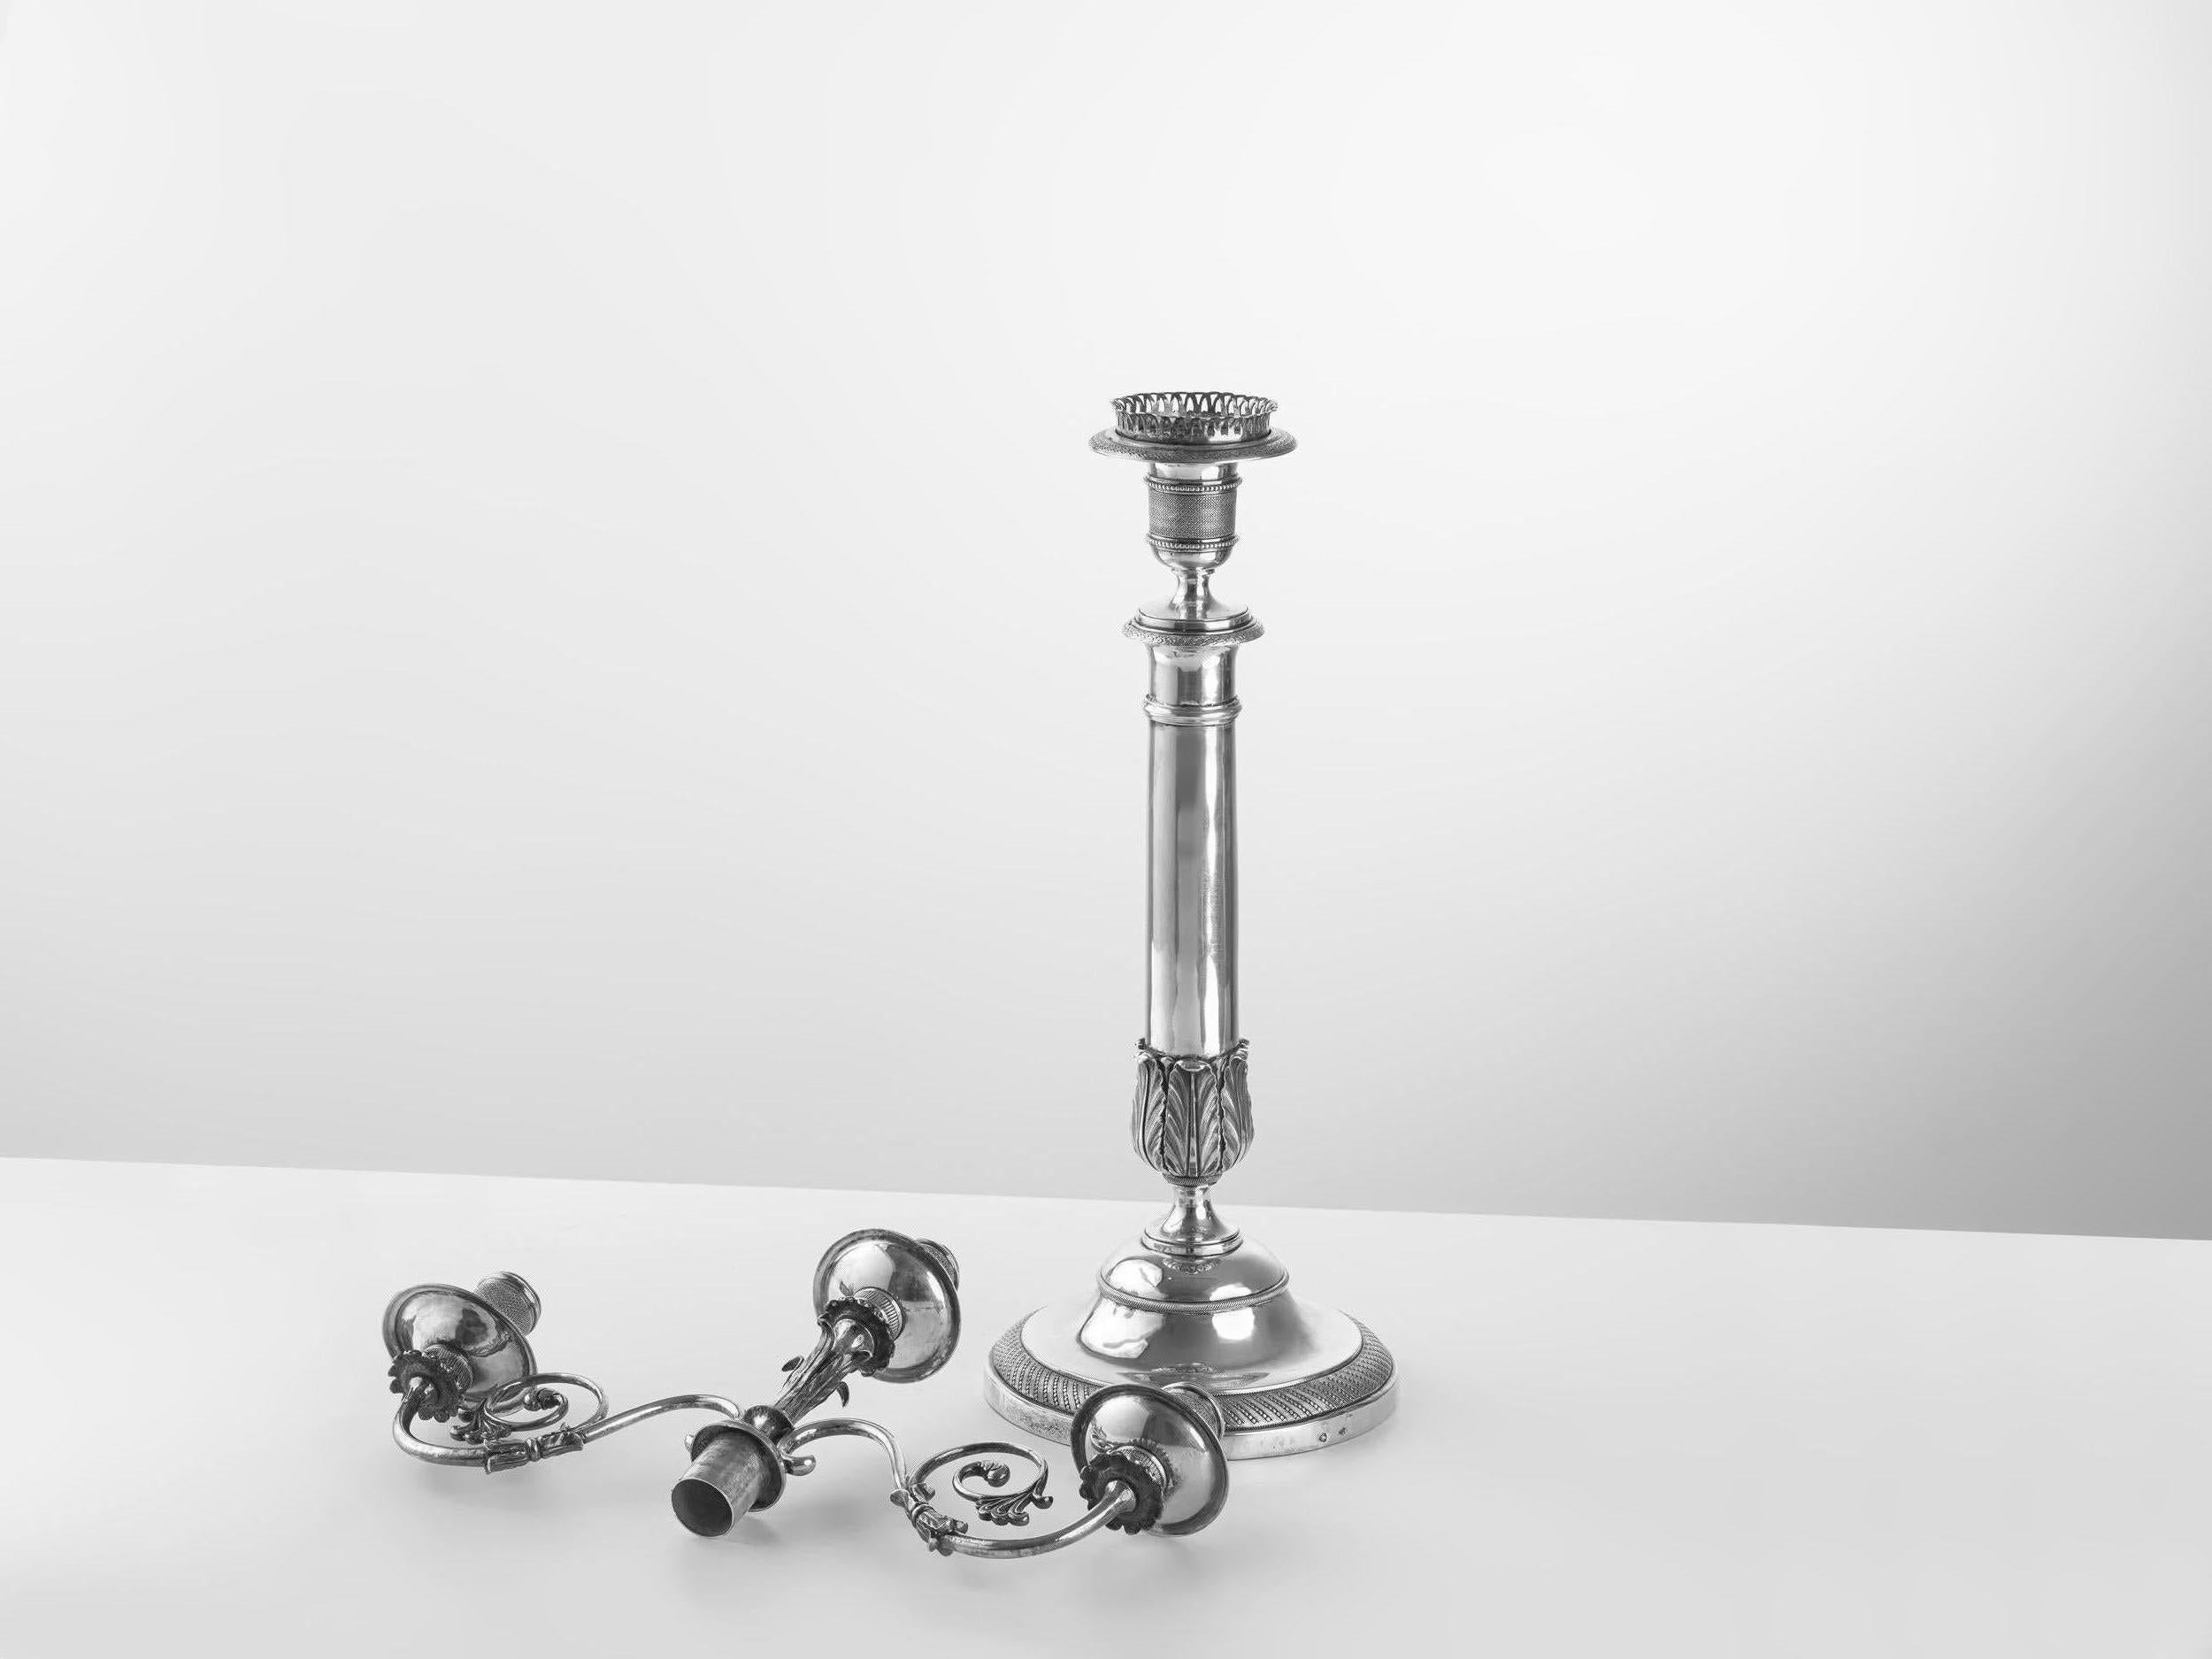 Pair of 19th century silver candelabra with a round base and with removable branches. High 45cm,
marks Rome Stato Pontificio, with the possibility of disassembling the upper part and using them individually as candlesticks.